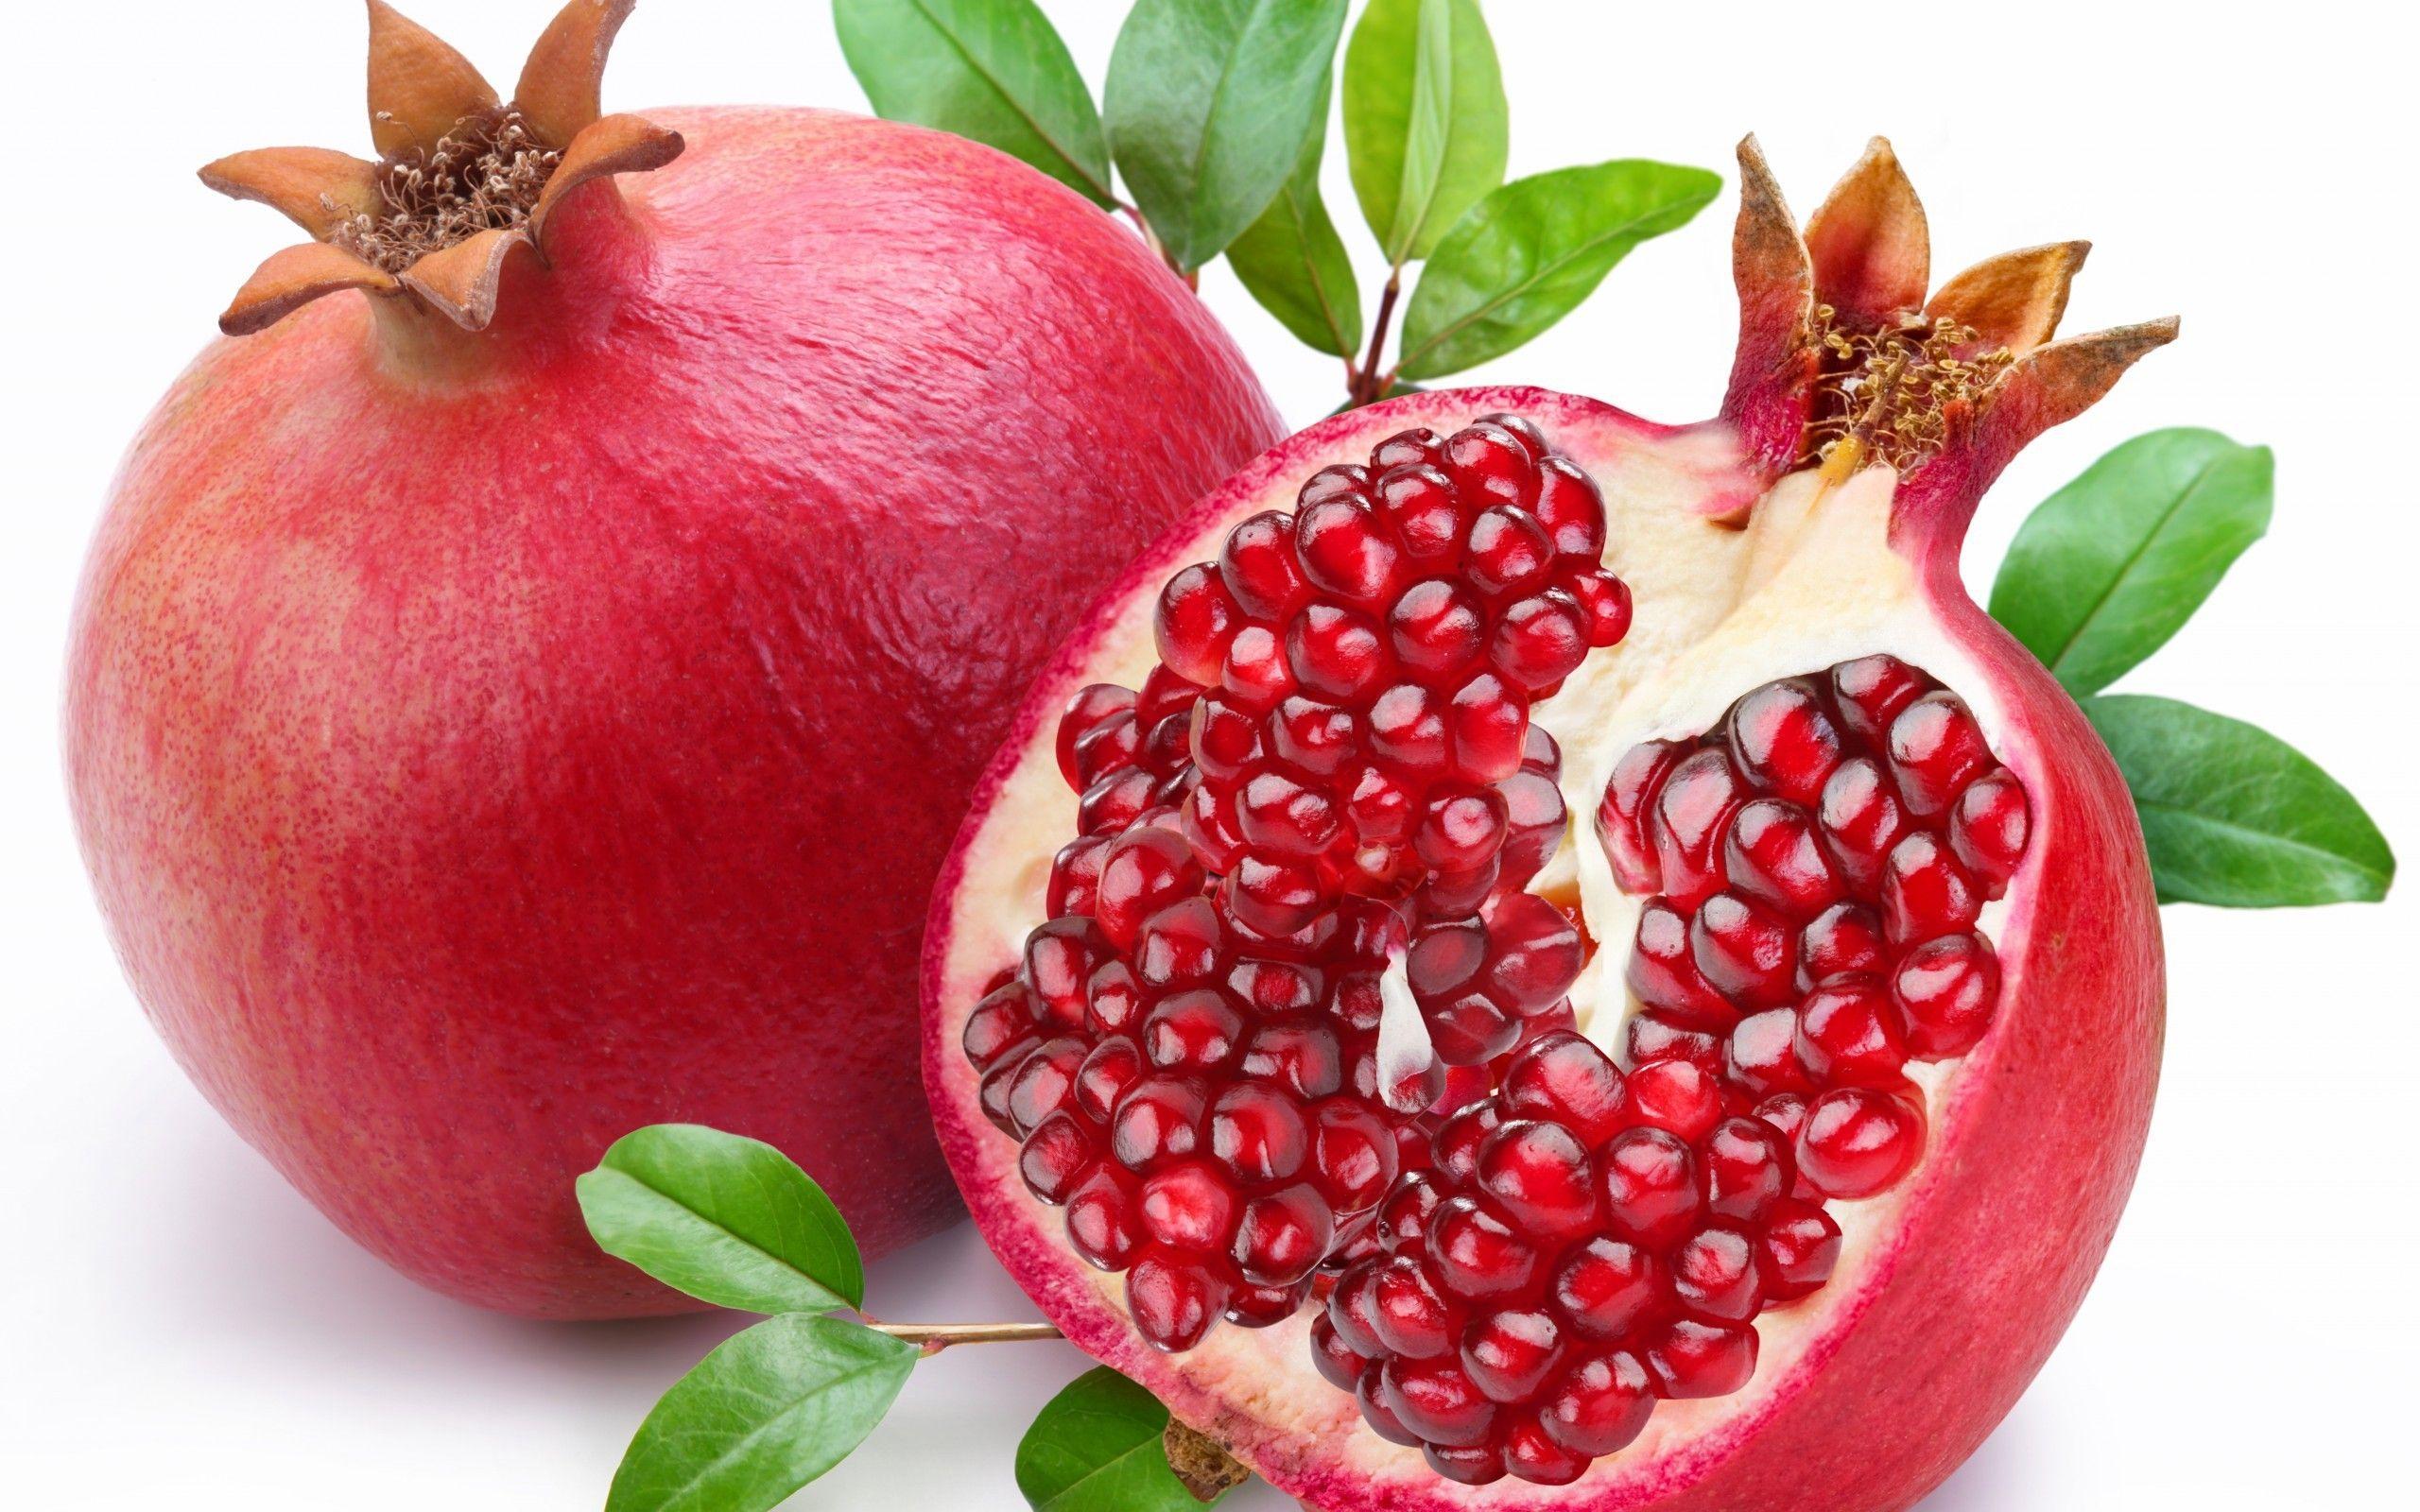 pomegranate fruit wallpaper and image, picture, photo